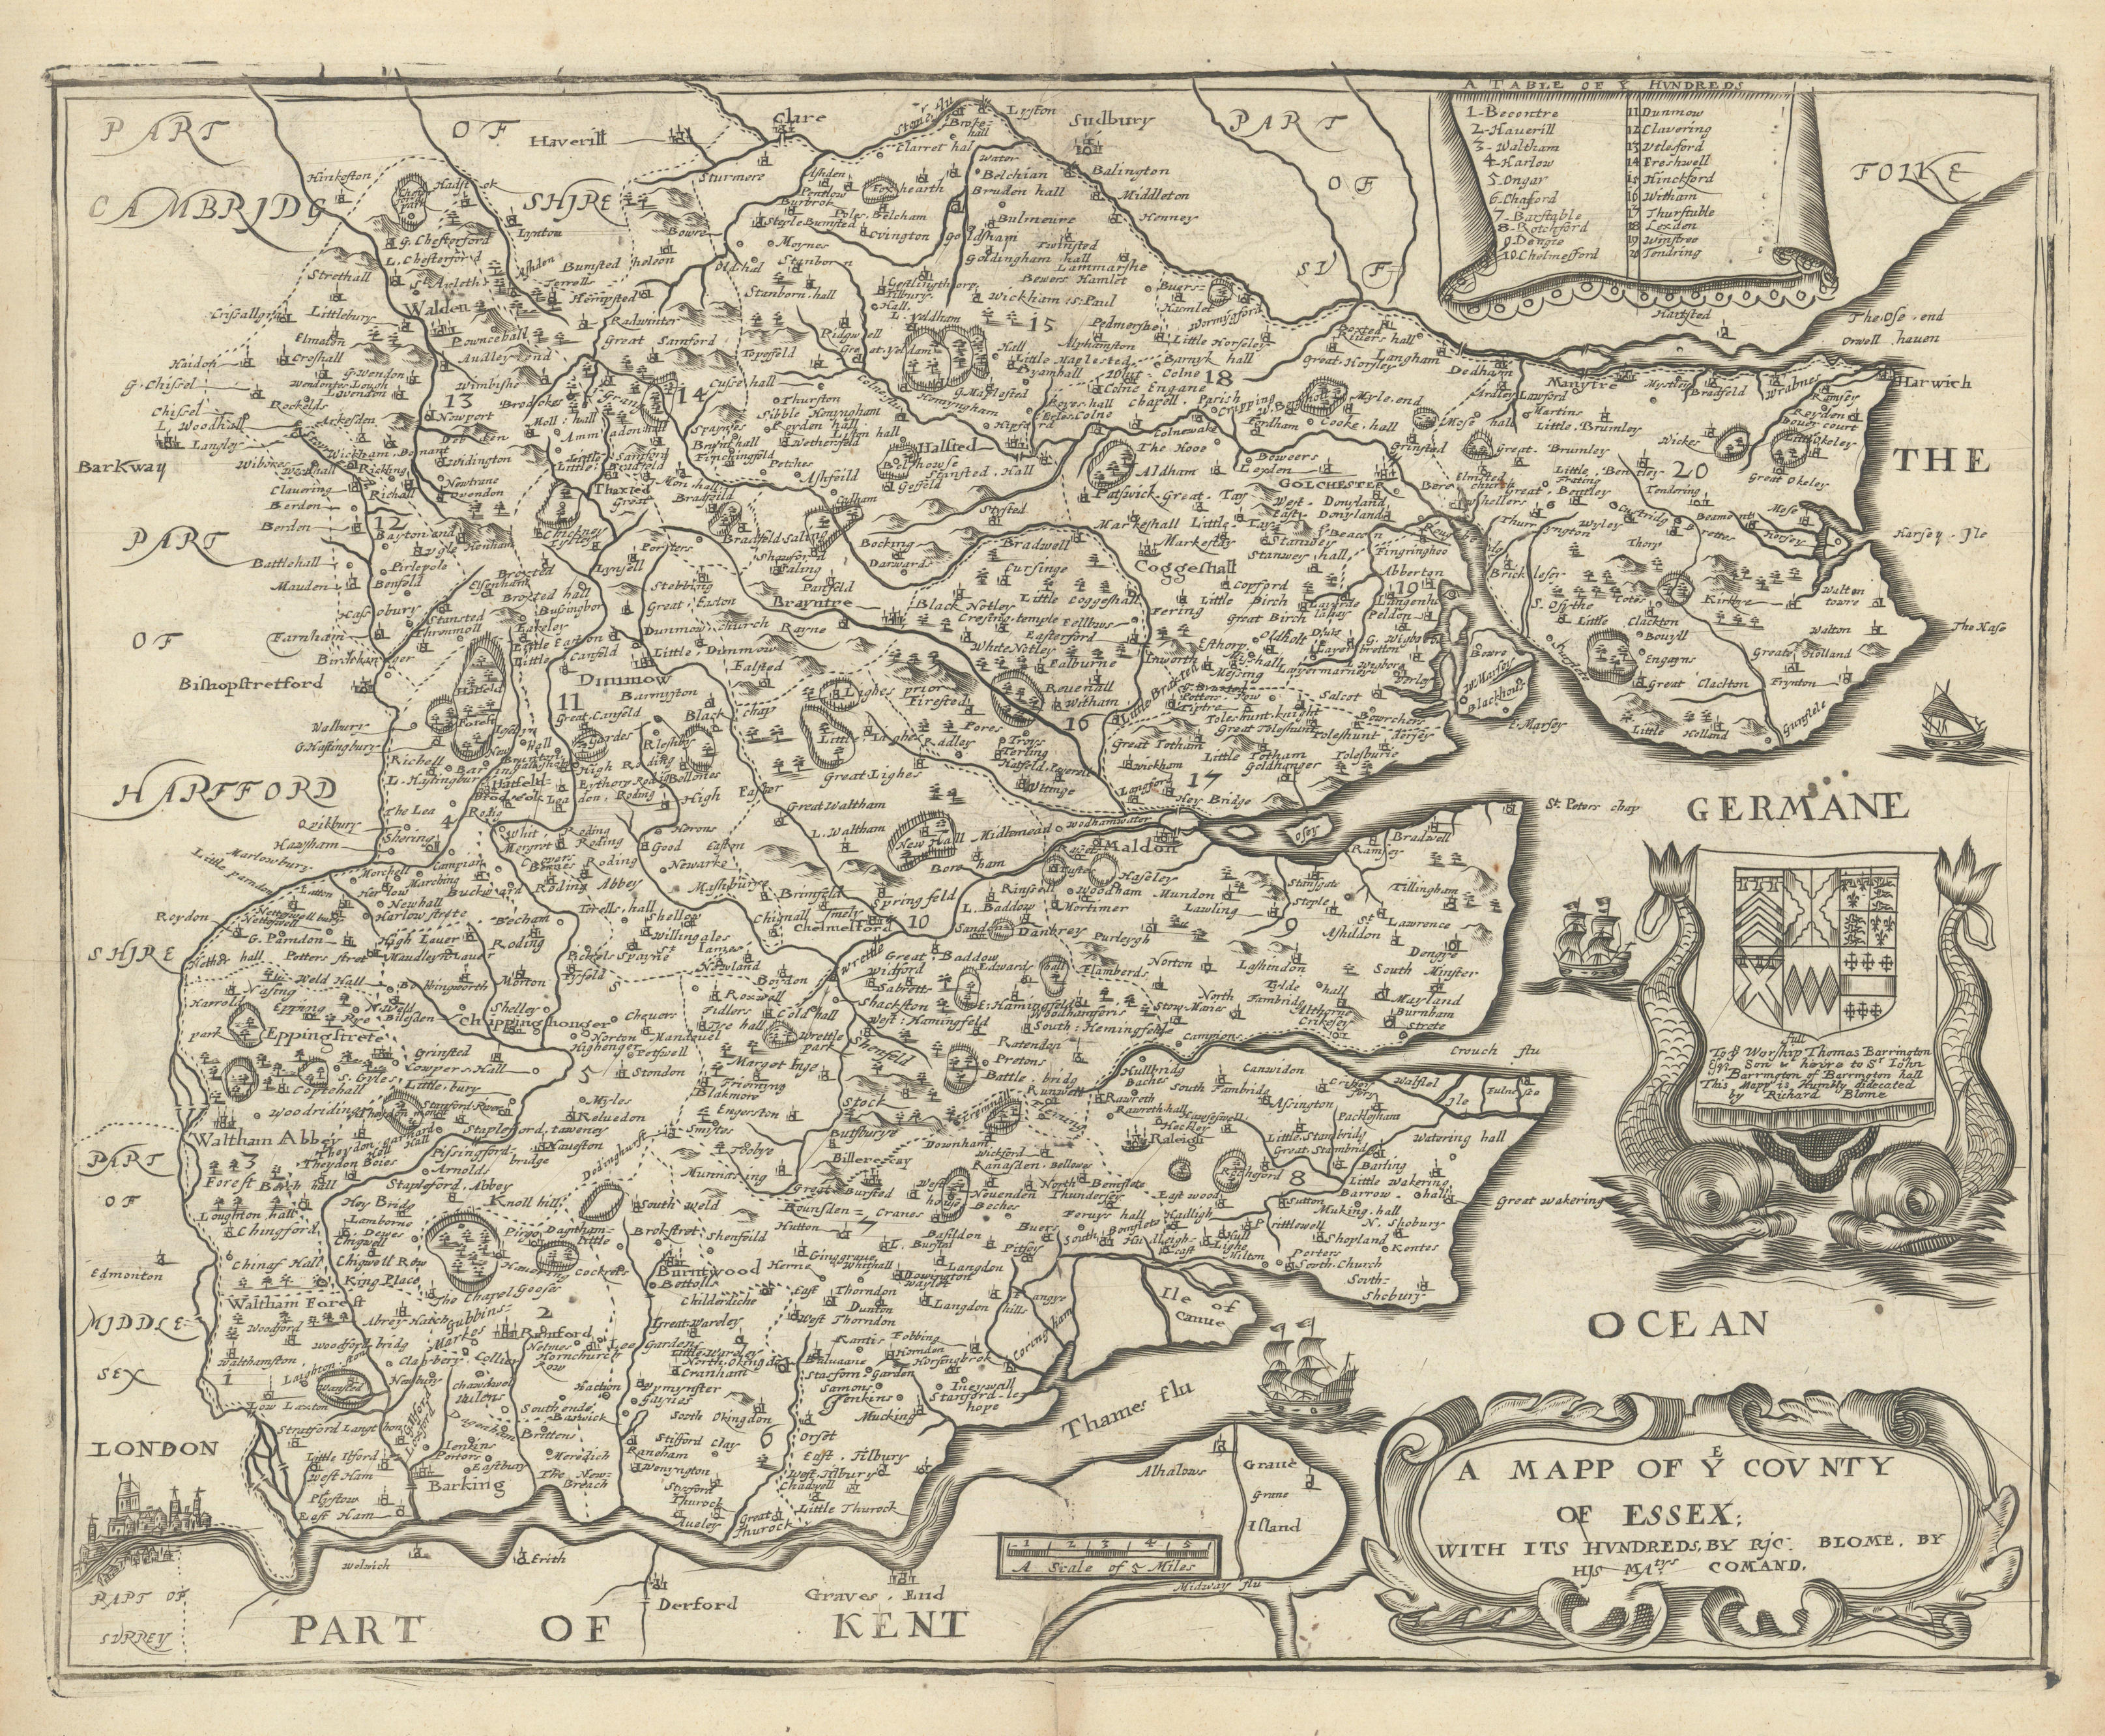 Associate Product A Mapp of ye County of Essex; with its Hundreds by Richard Blome 1673 old